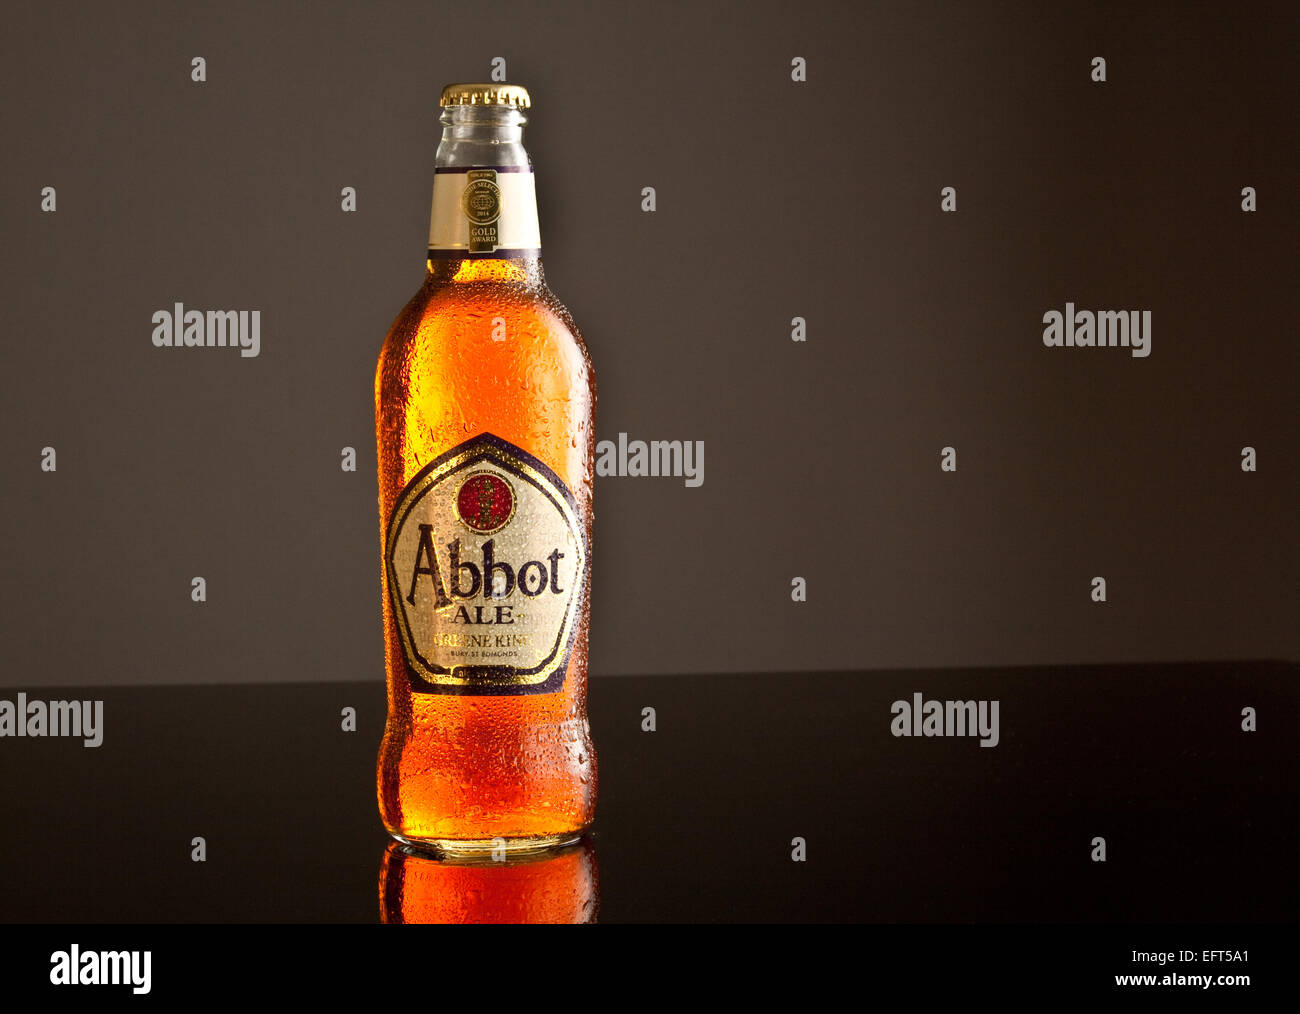 Bottle of Abbot Ale in various frame shapes Stock Photo